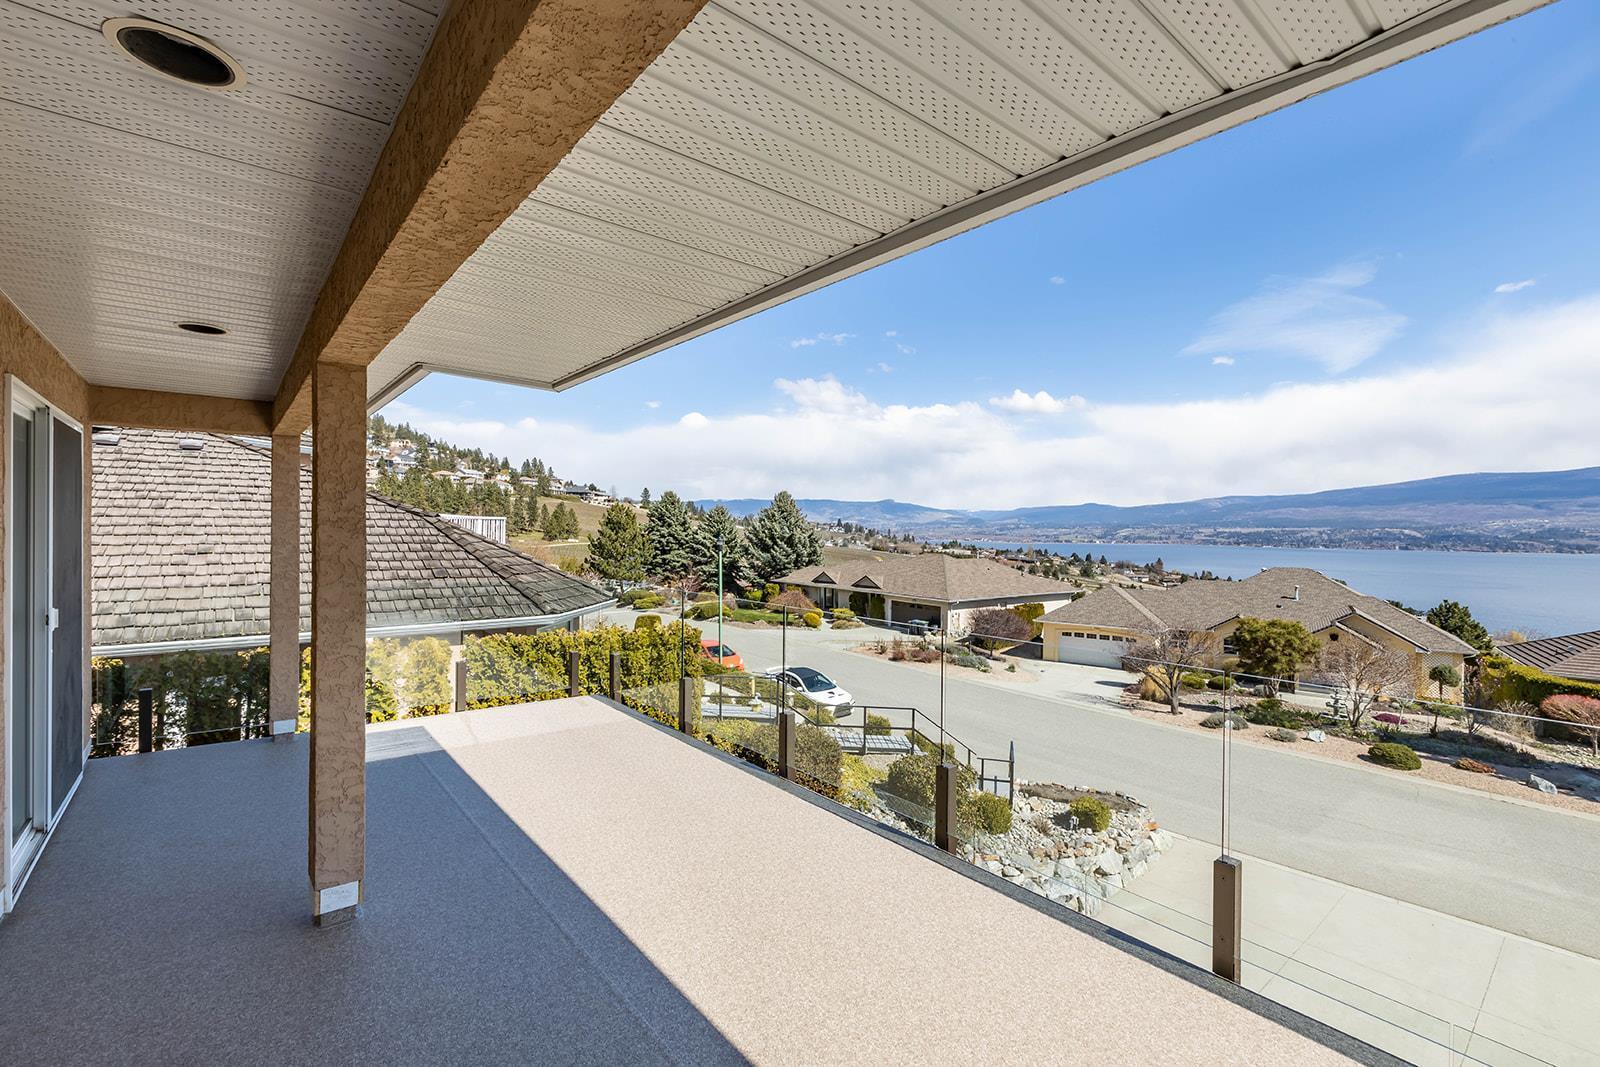      3376 Chancellor Place  , West Kelowna, Central Okanagan,  ;  Listing Number: MLS 10273955